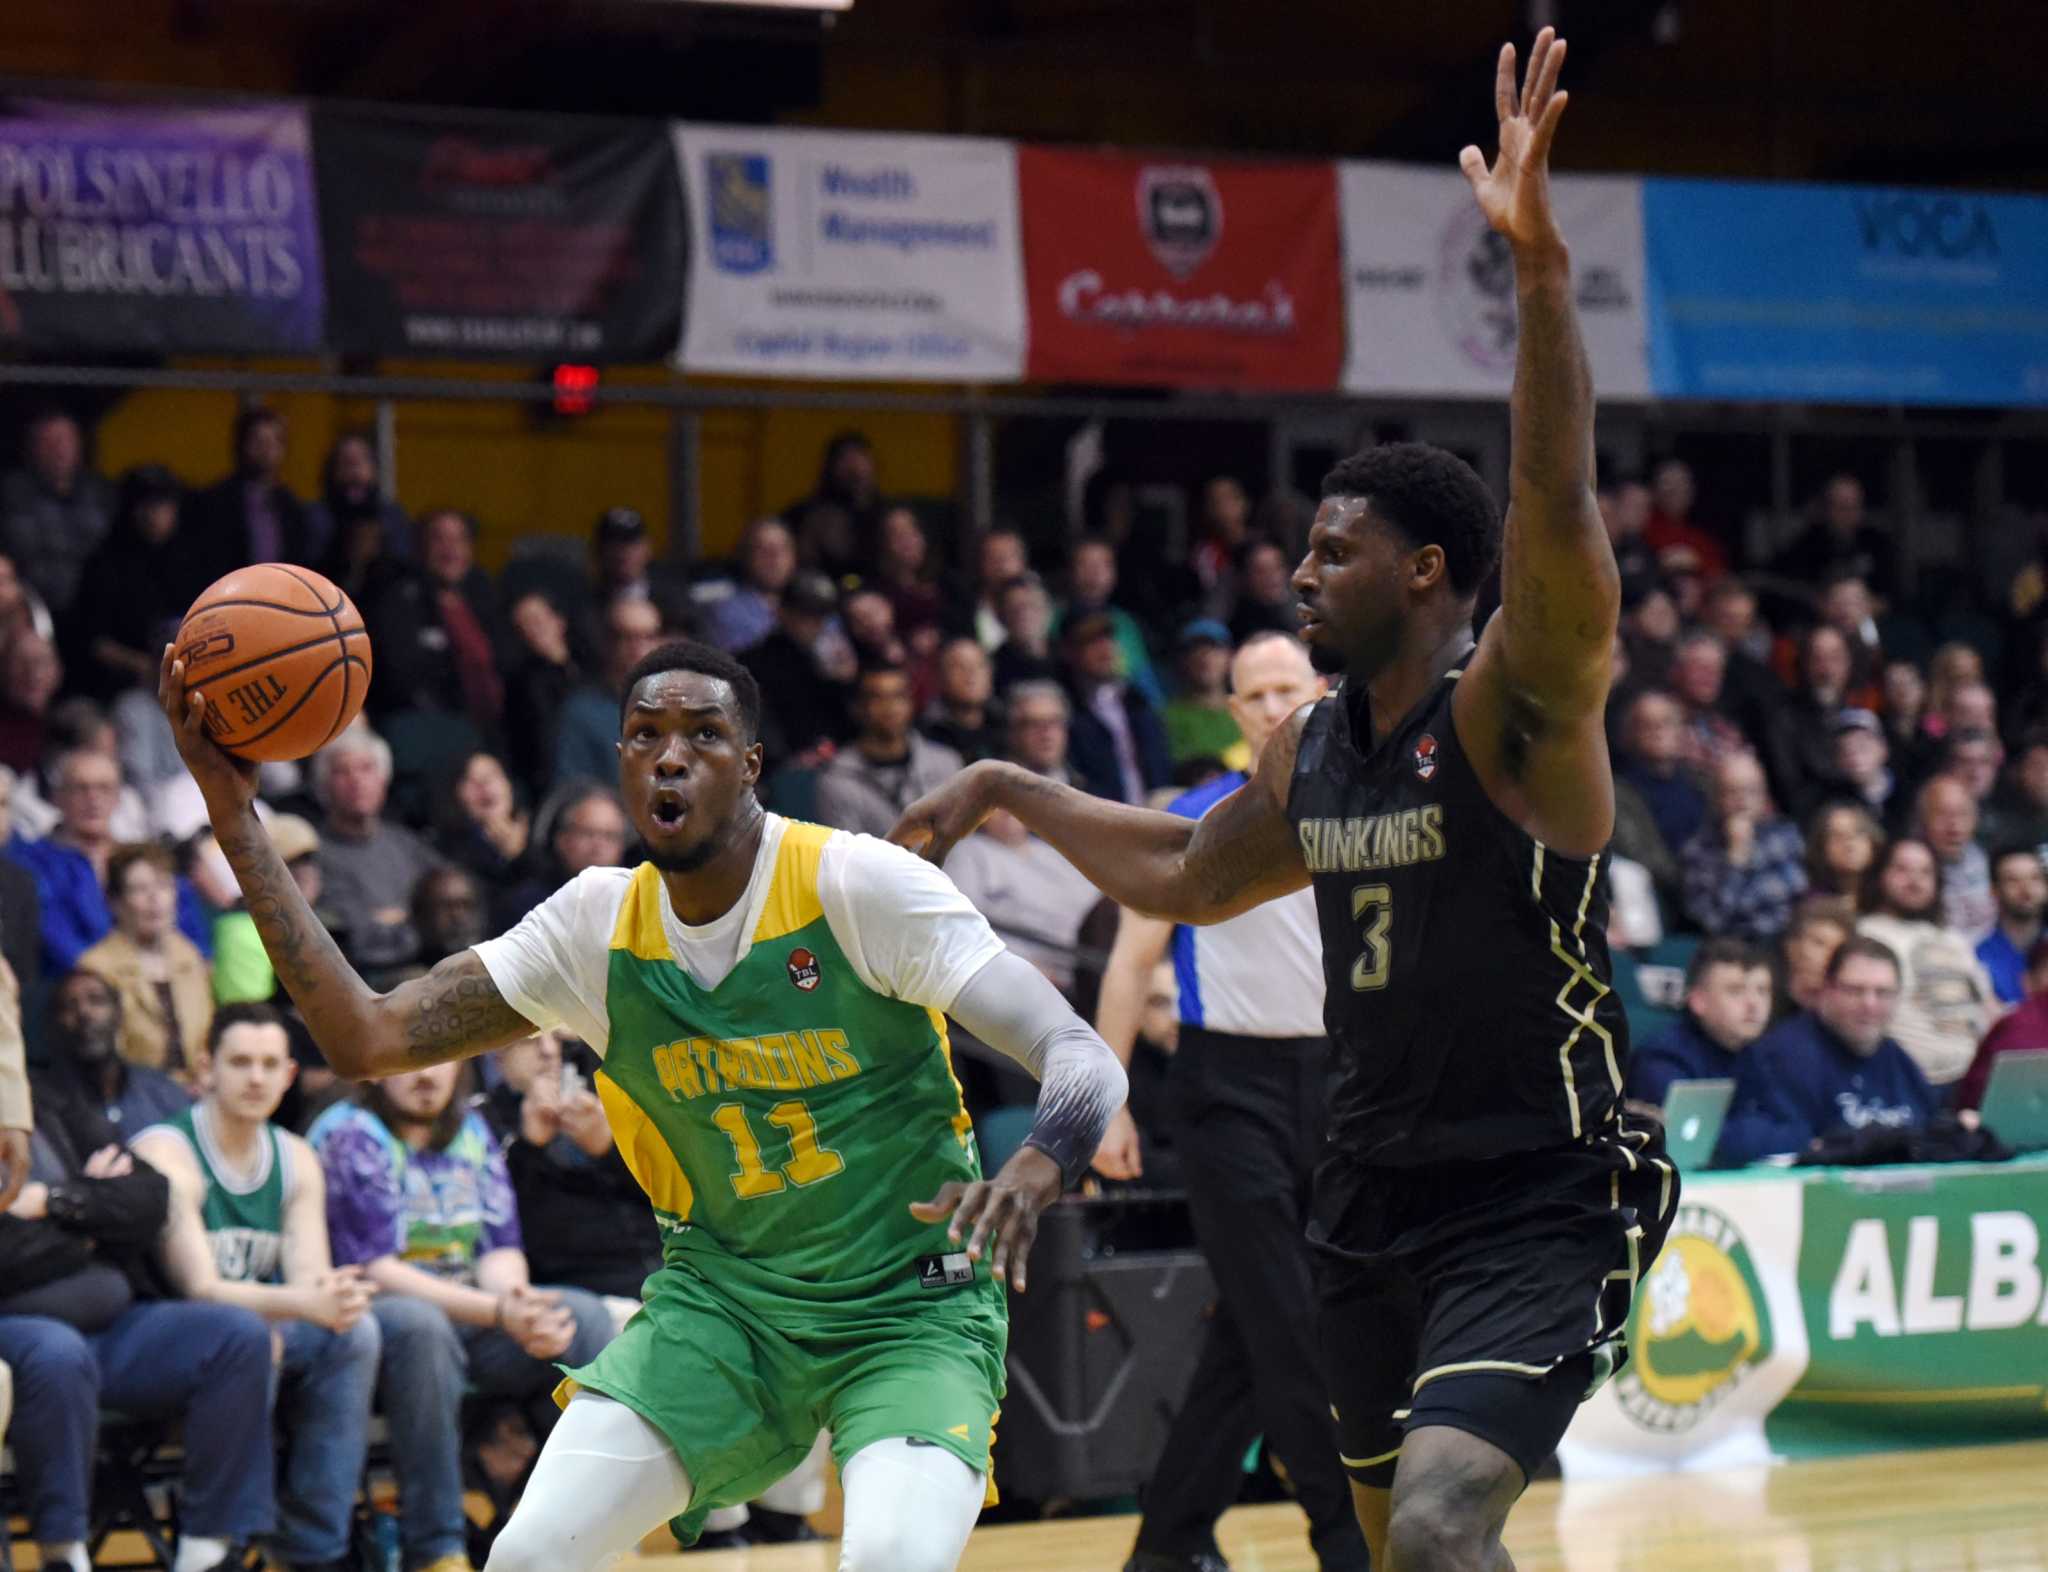 Albany Patroons to return in 2020 with new owner